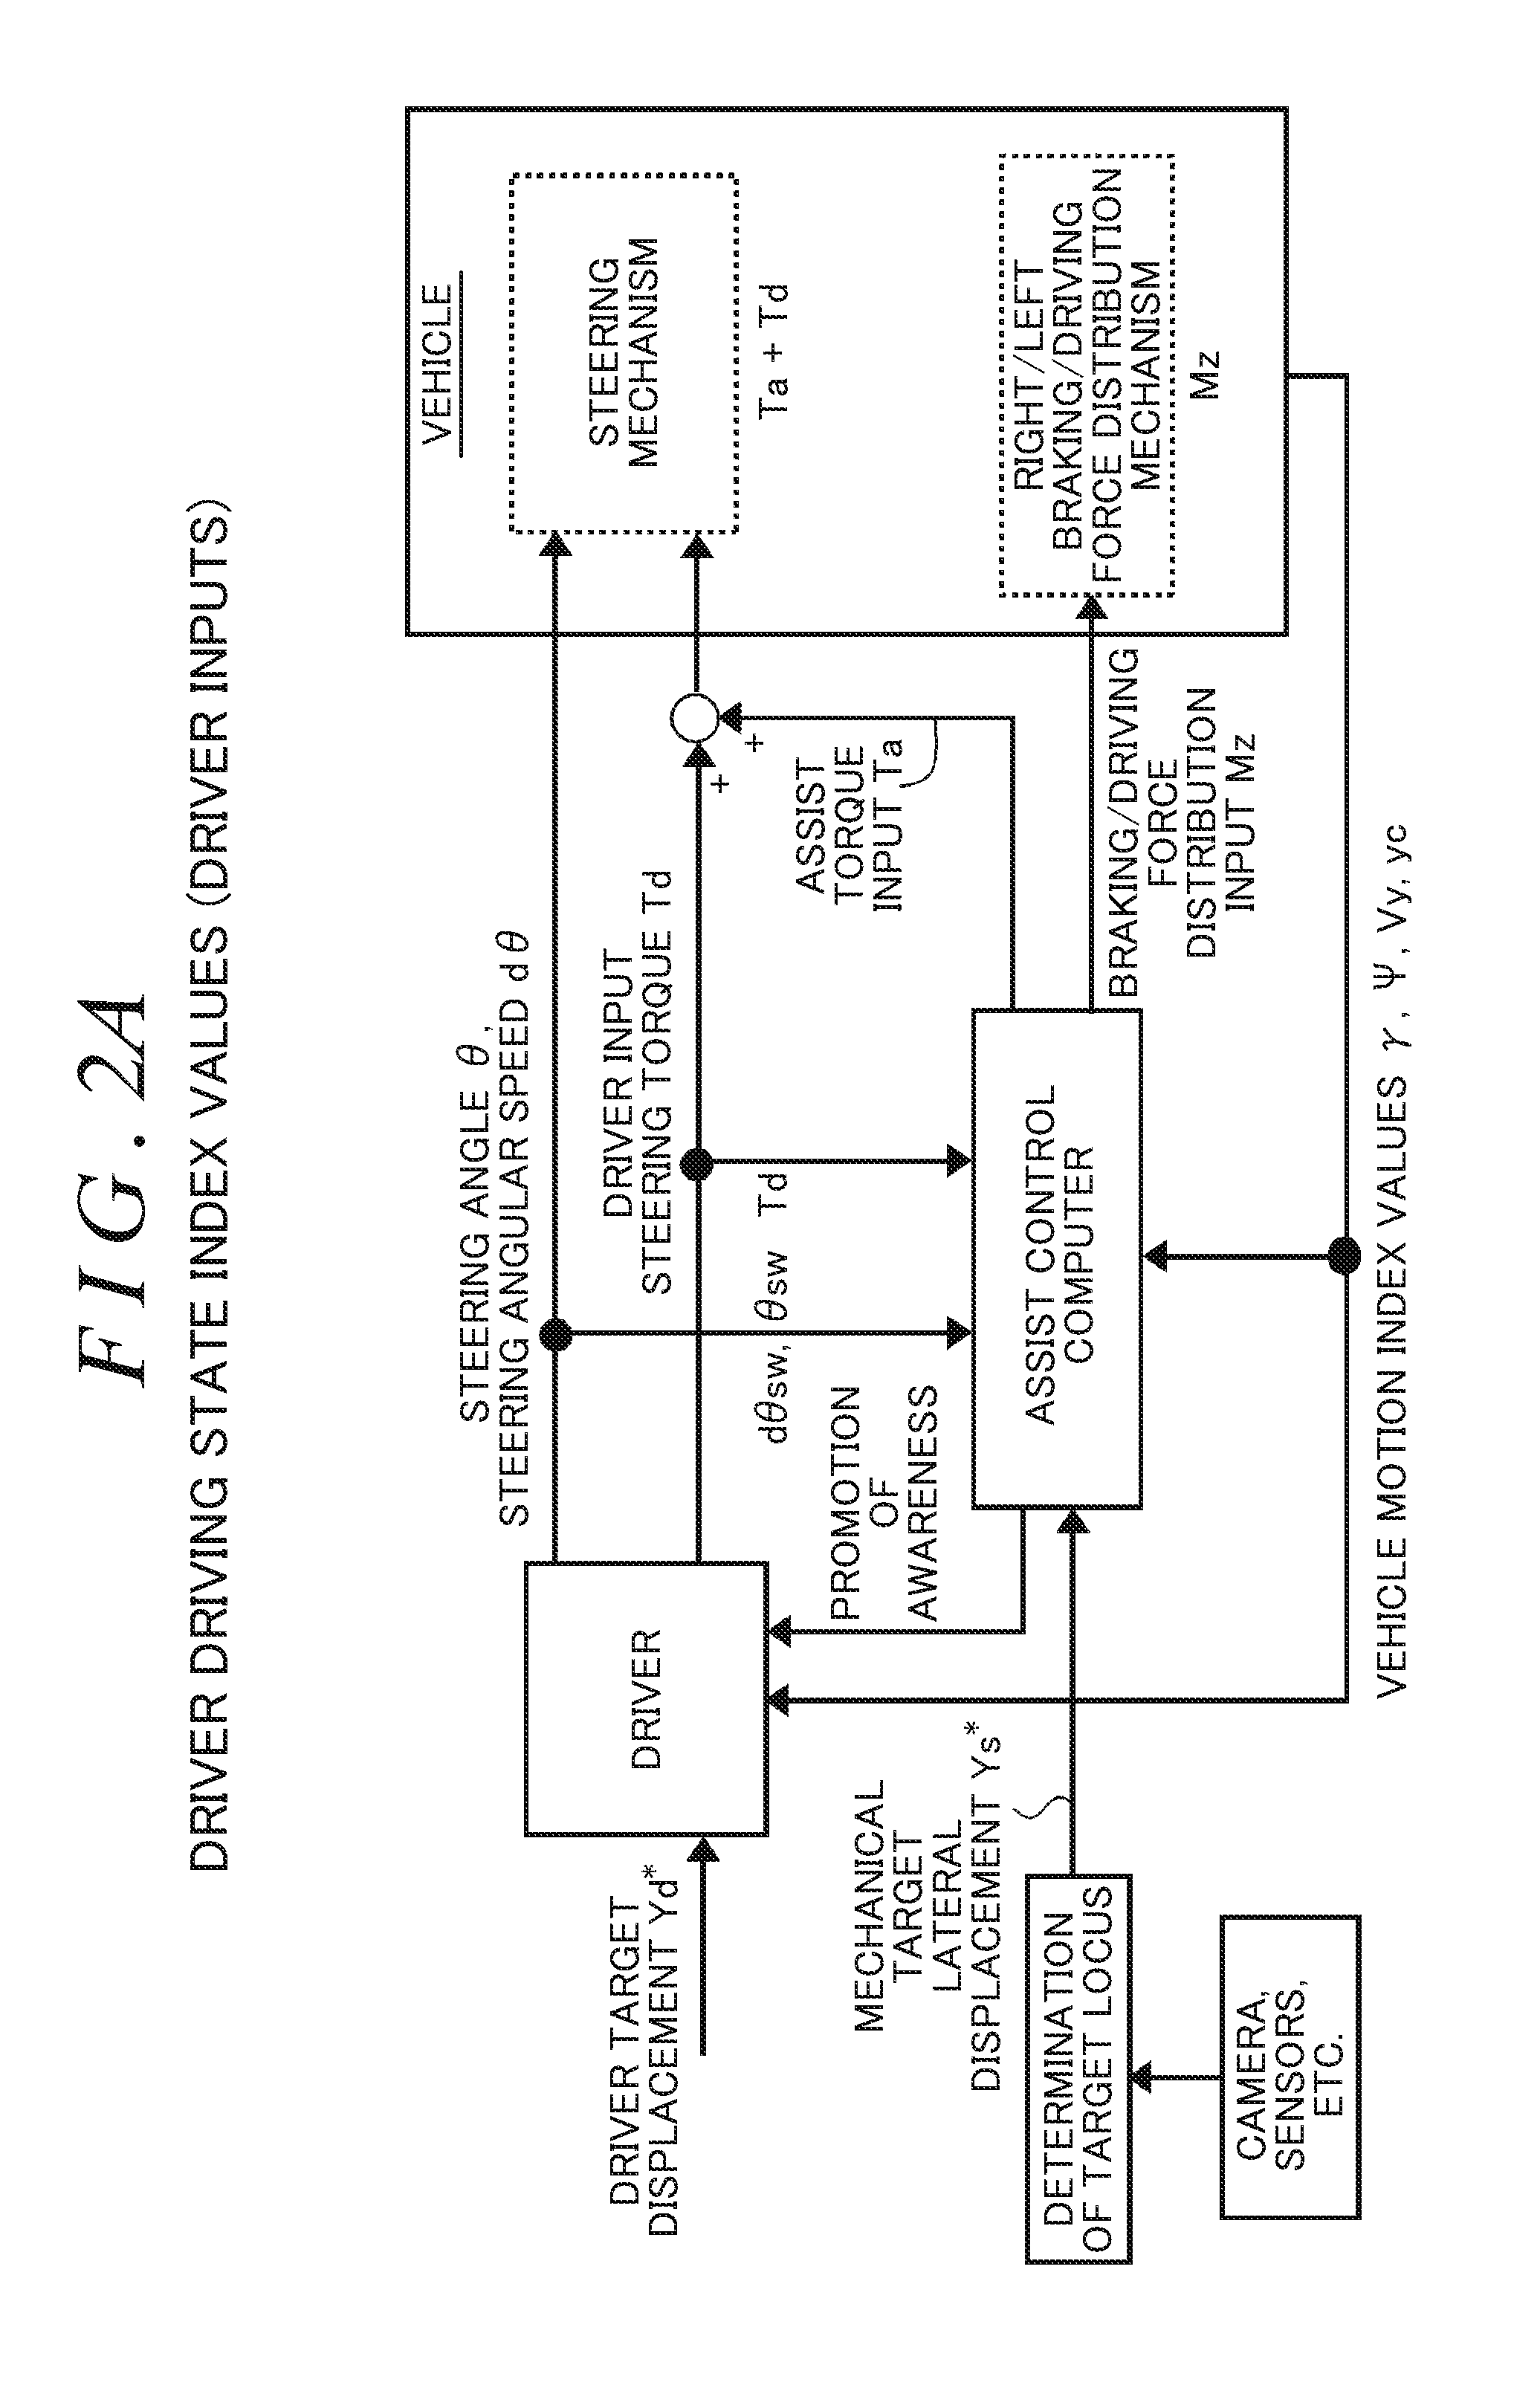 Driving support control apparatus for vehicle